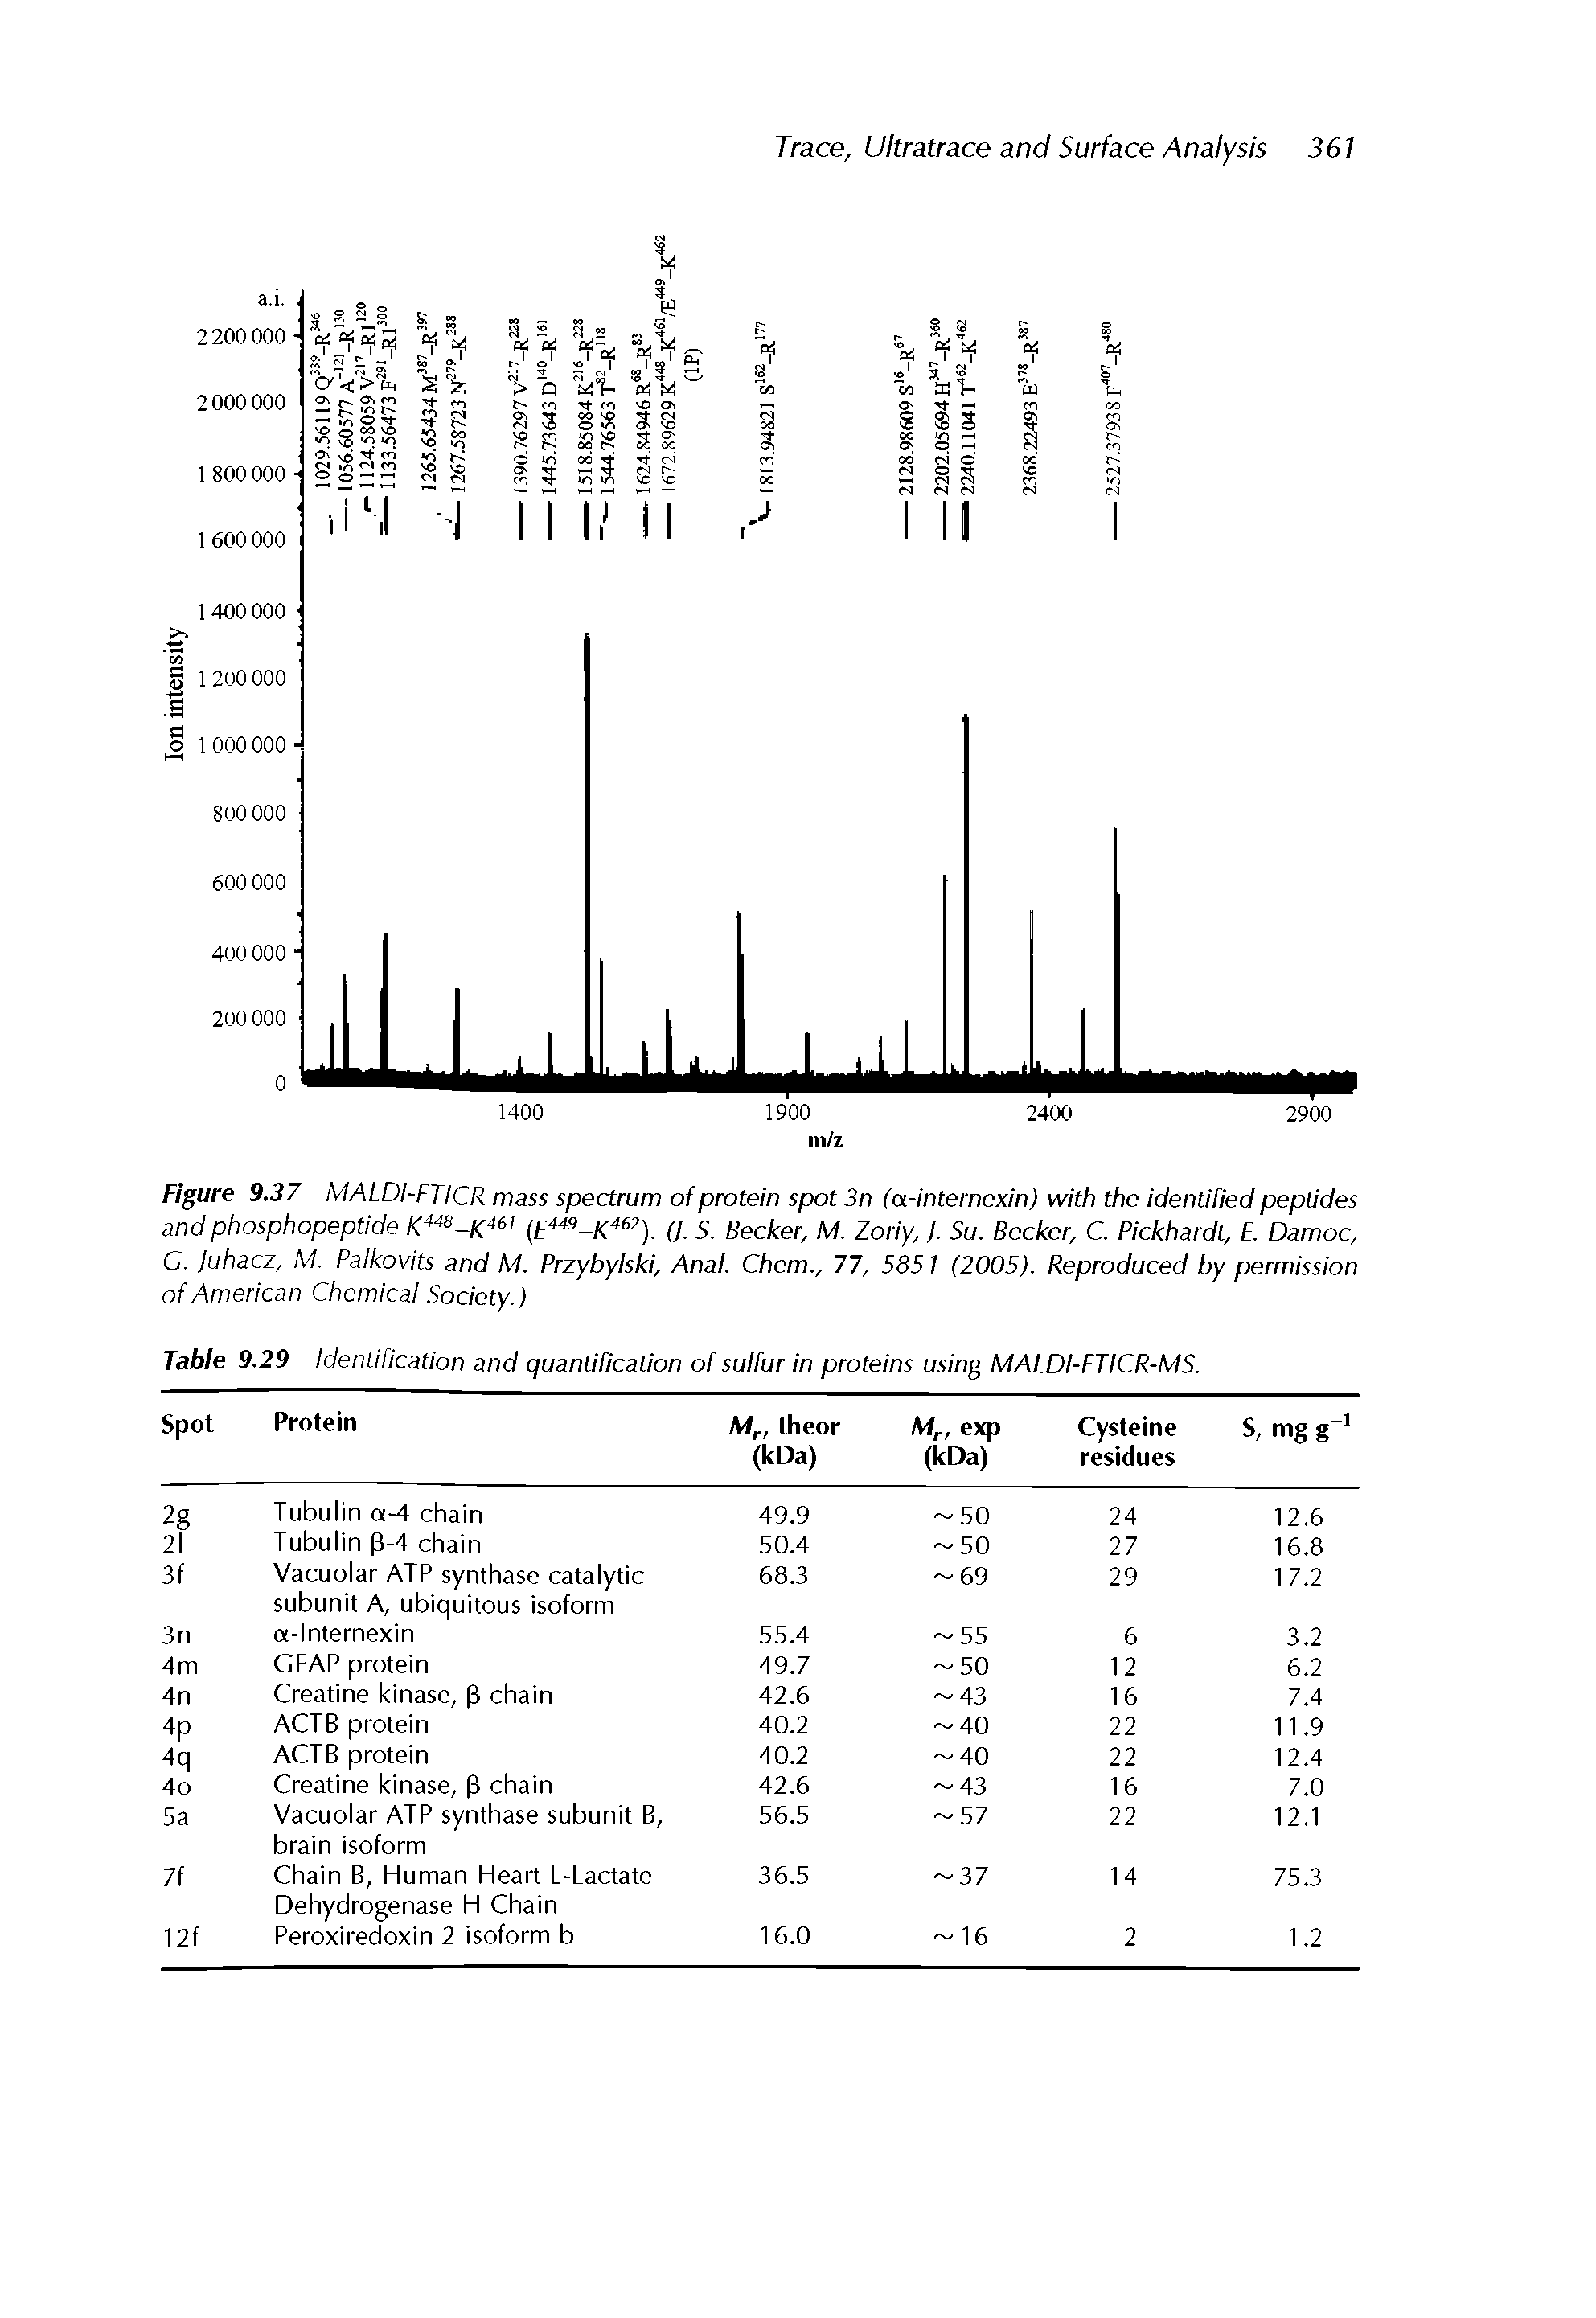 Table 9.29 Identification and quantification of sulfur in proteins using MALDI-FTICR-MS.